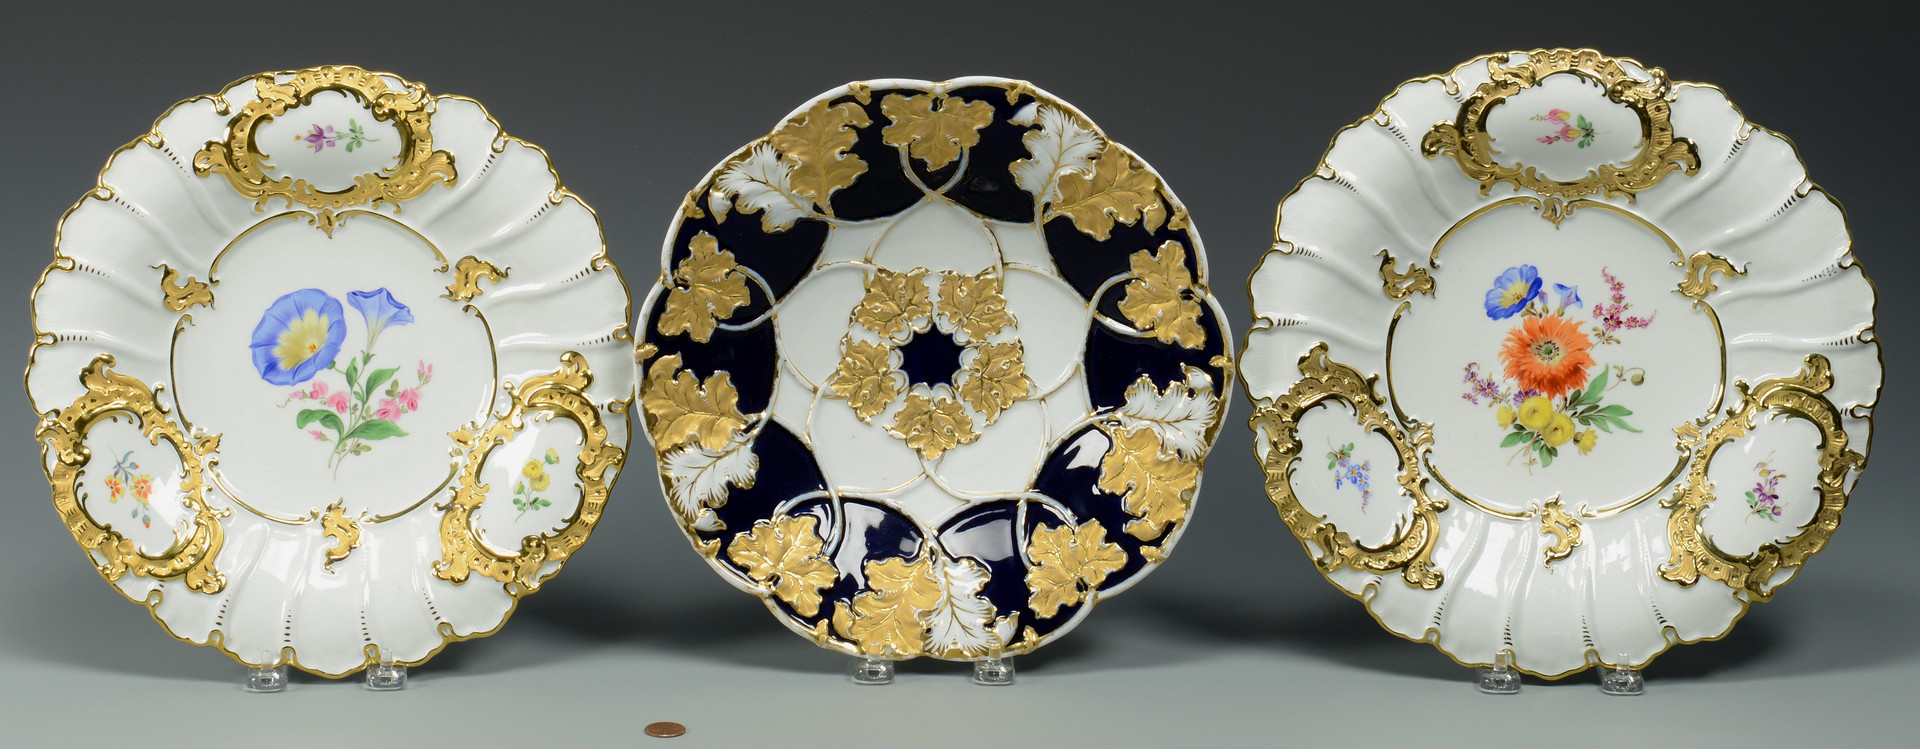 Lot 331: 3 Meissen Chargers